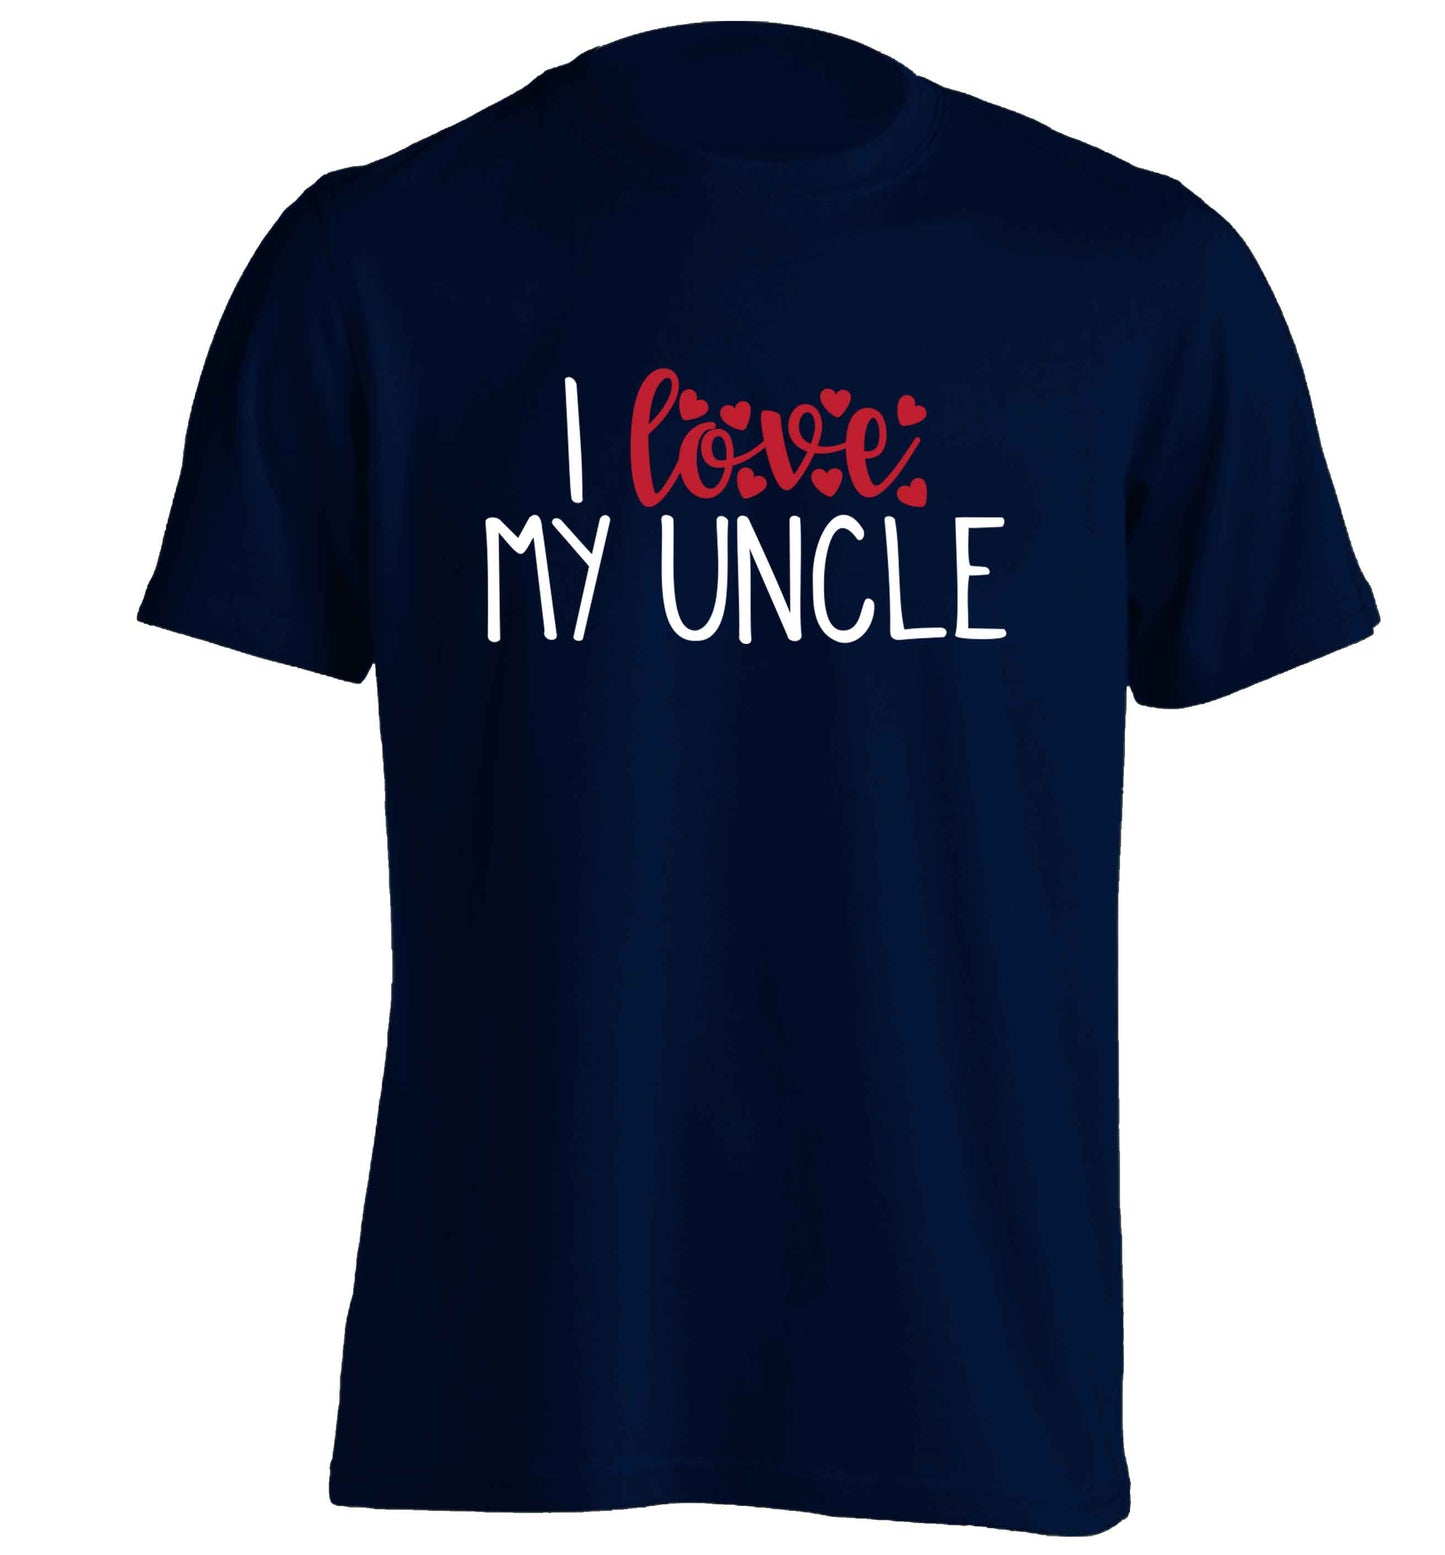 I love my uncle adults unisex navy Tshirt 2XL